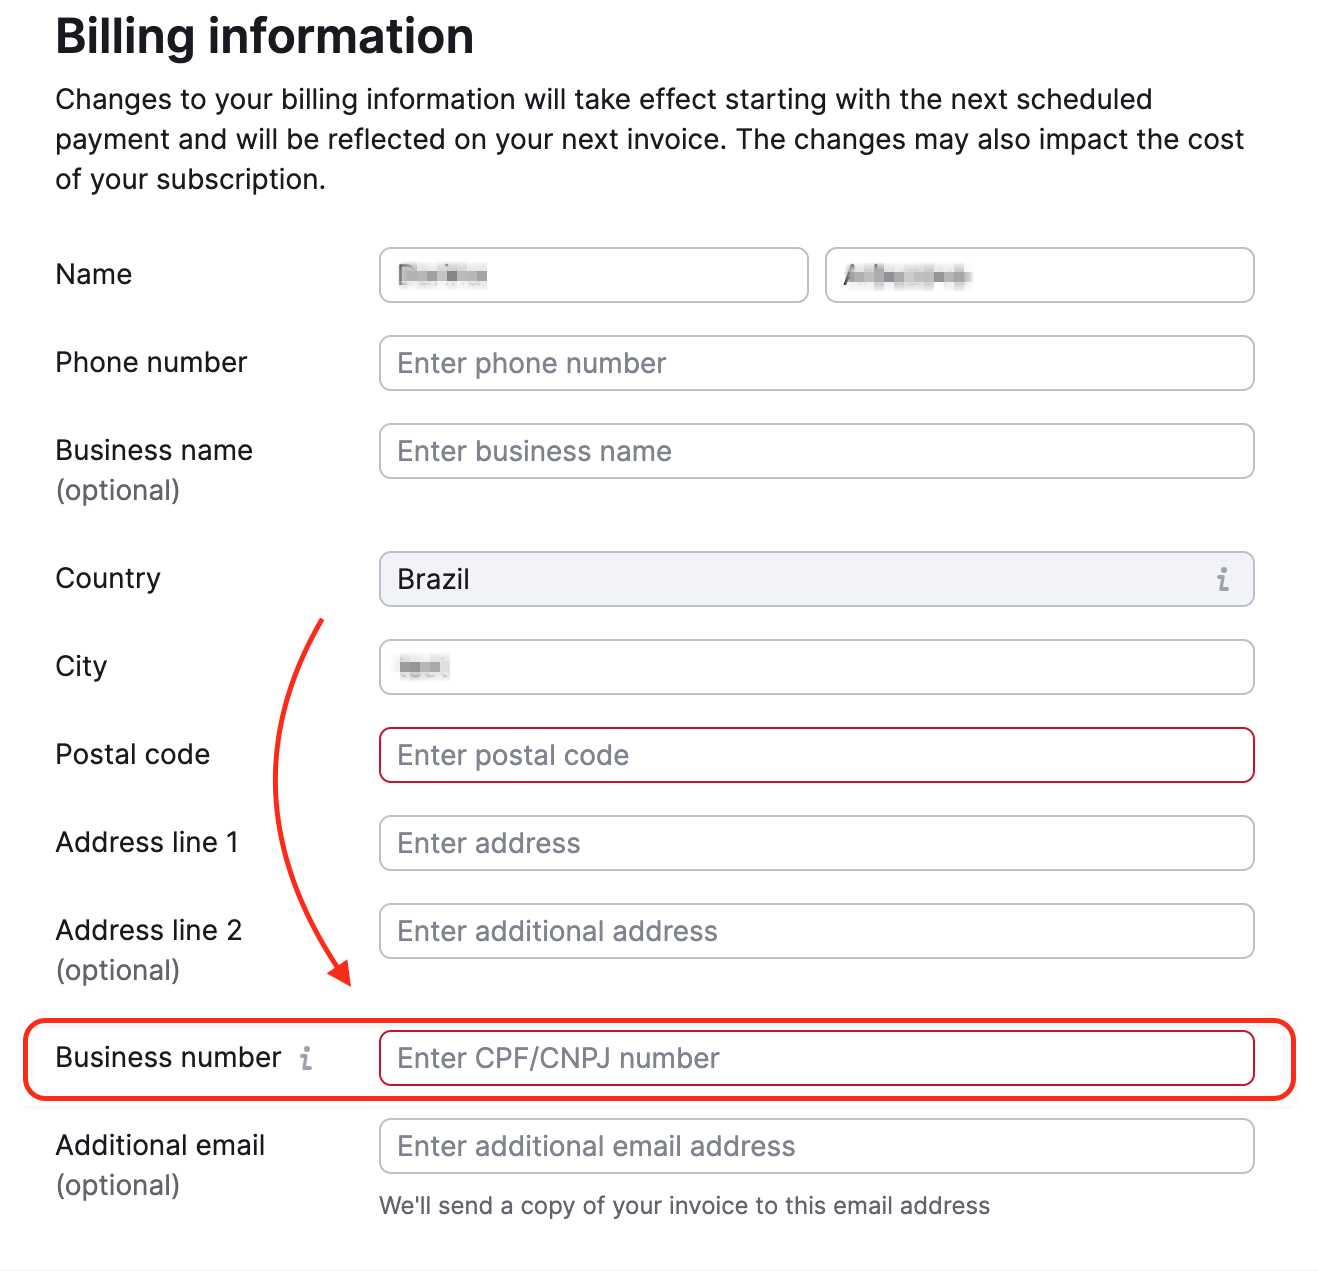 An example of what the Billing information pop-up window looks like, with Business number field highlighted with red.